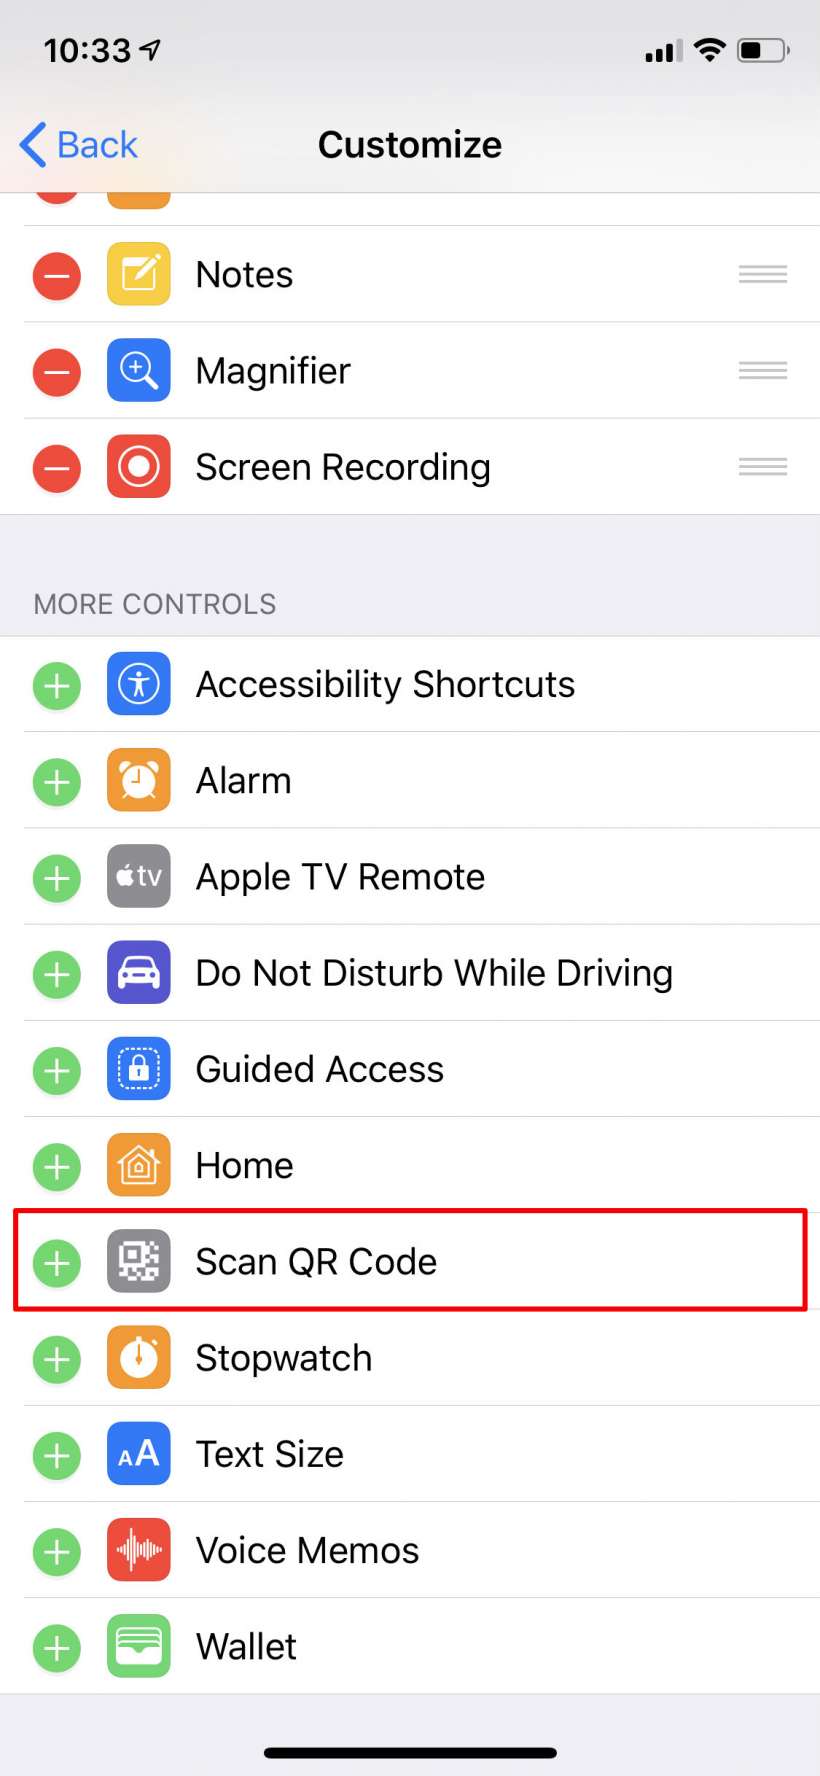 How to add QR scanner to Control Center on iPhone and iPad in iOS 12.